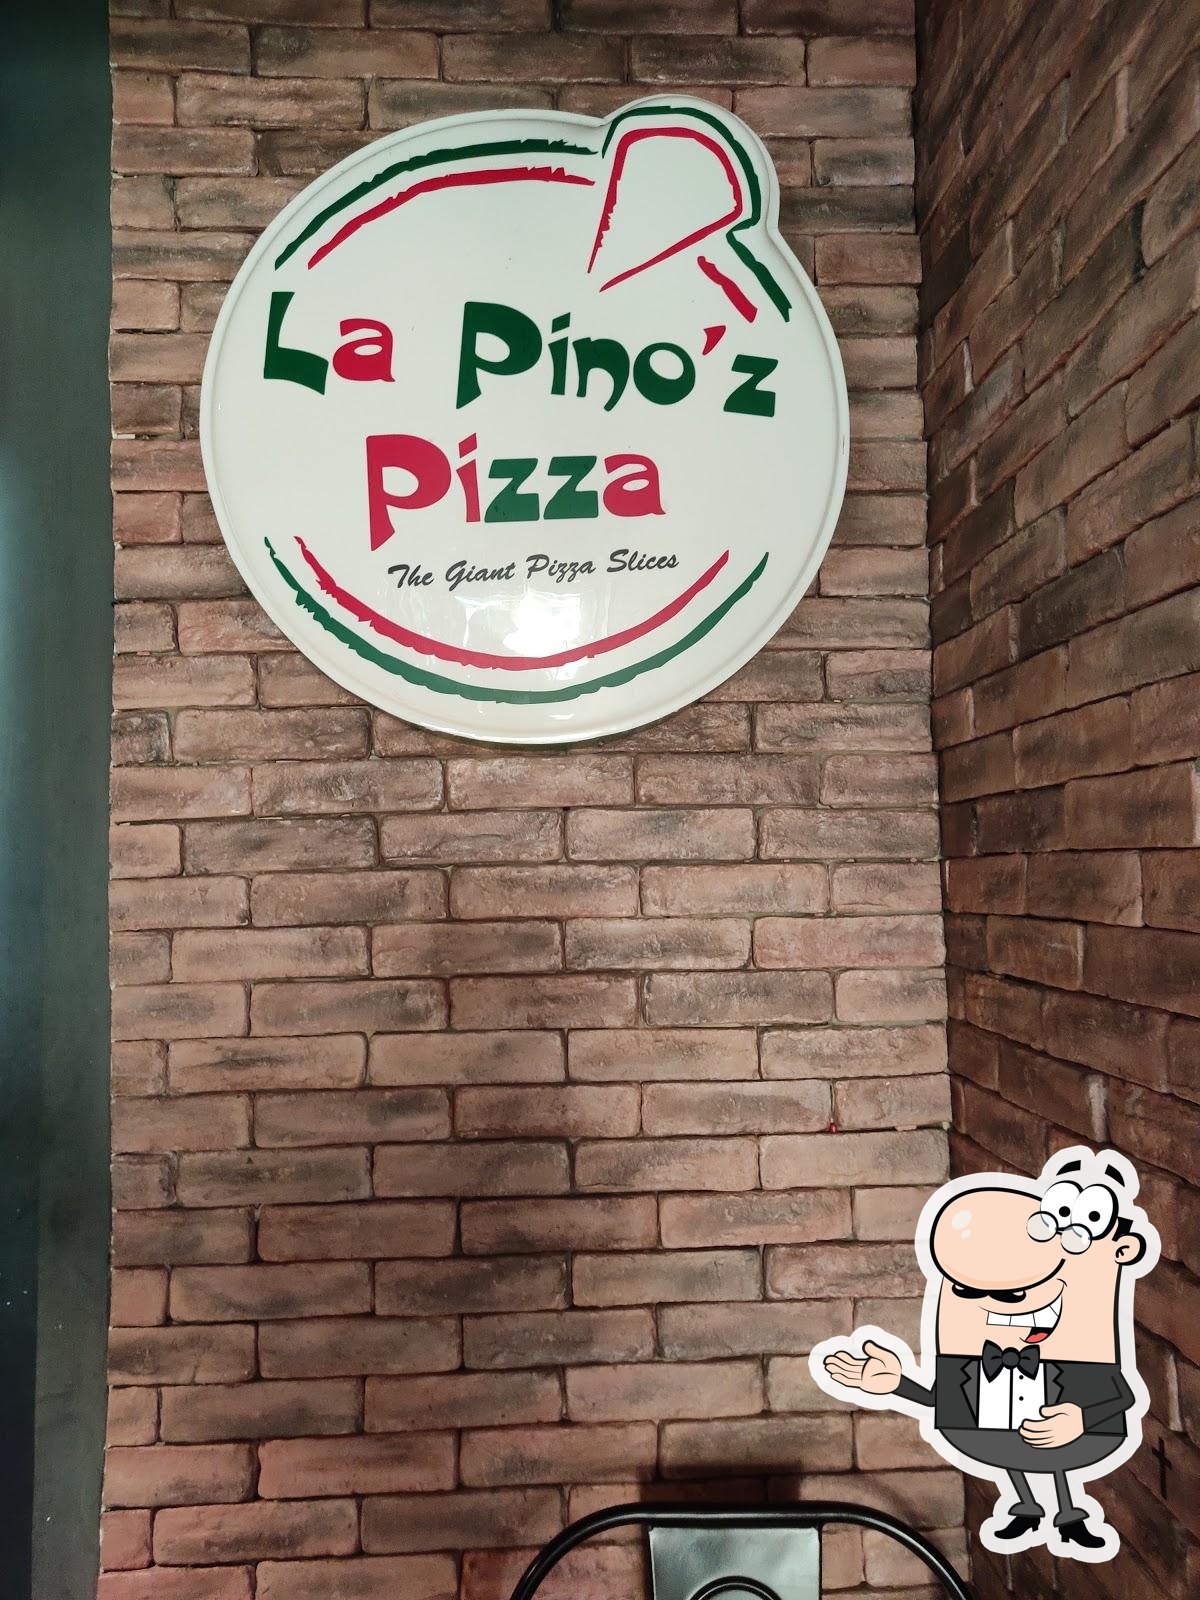 La Pino'Z Pizza Outlet in Lashkar,Gwalior - Best Pizza Outlets in Gwalior -  Justdial